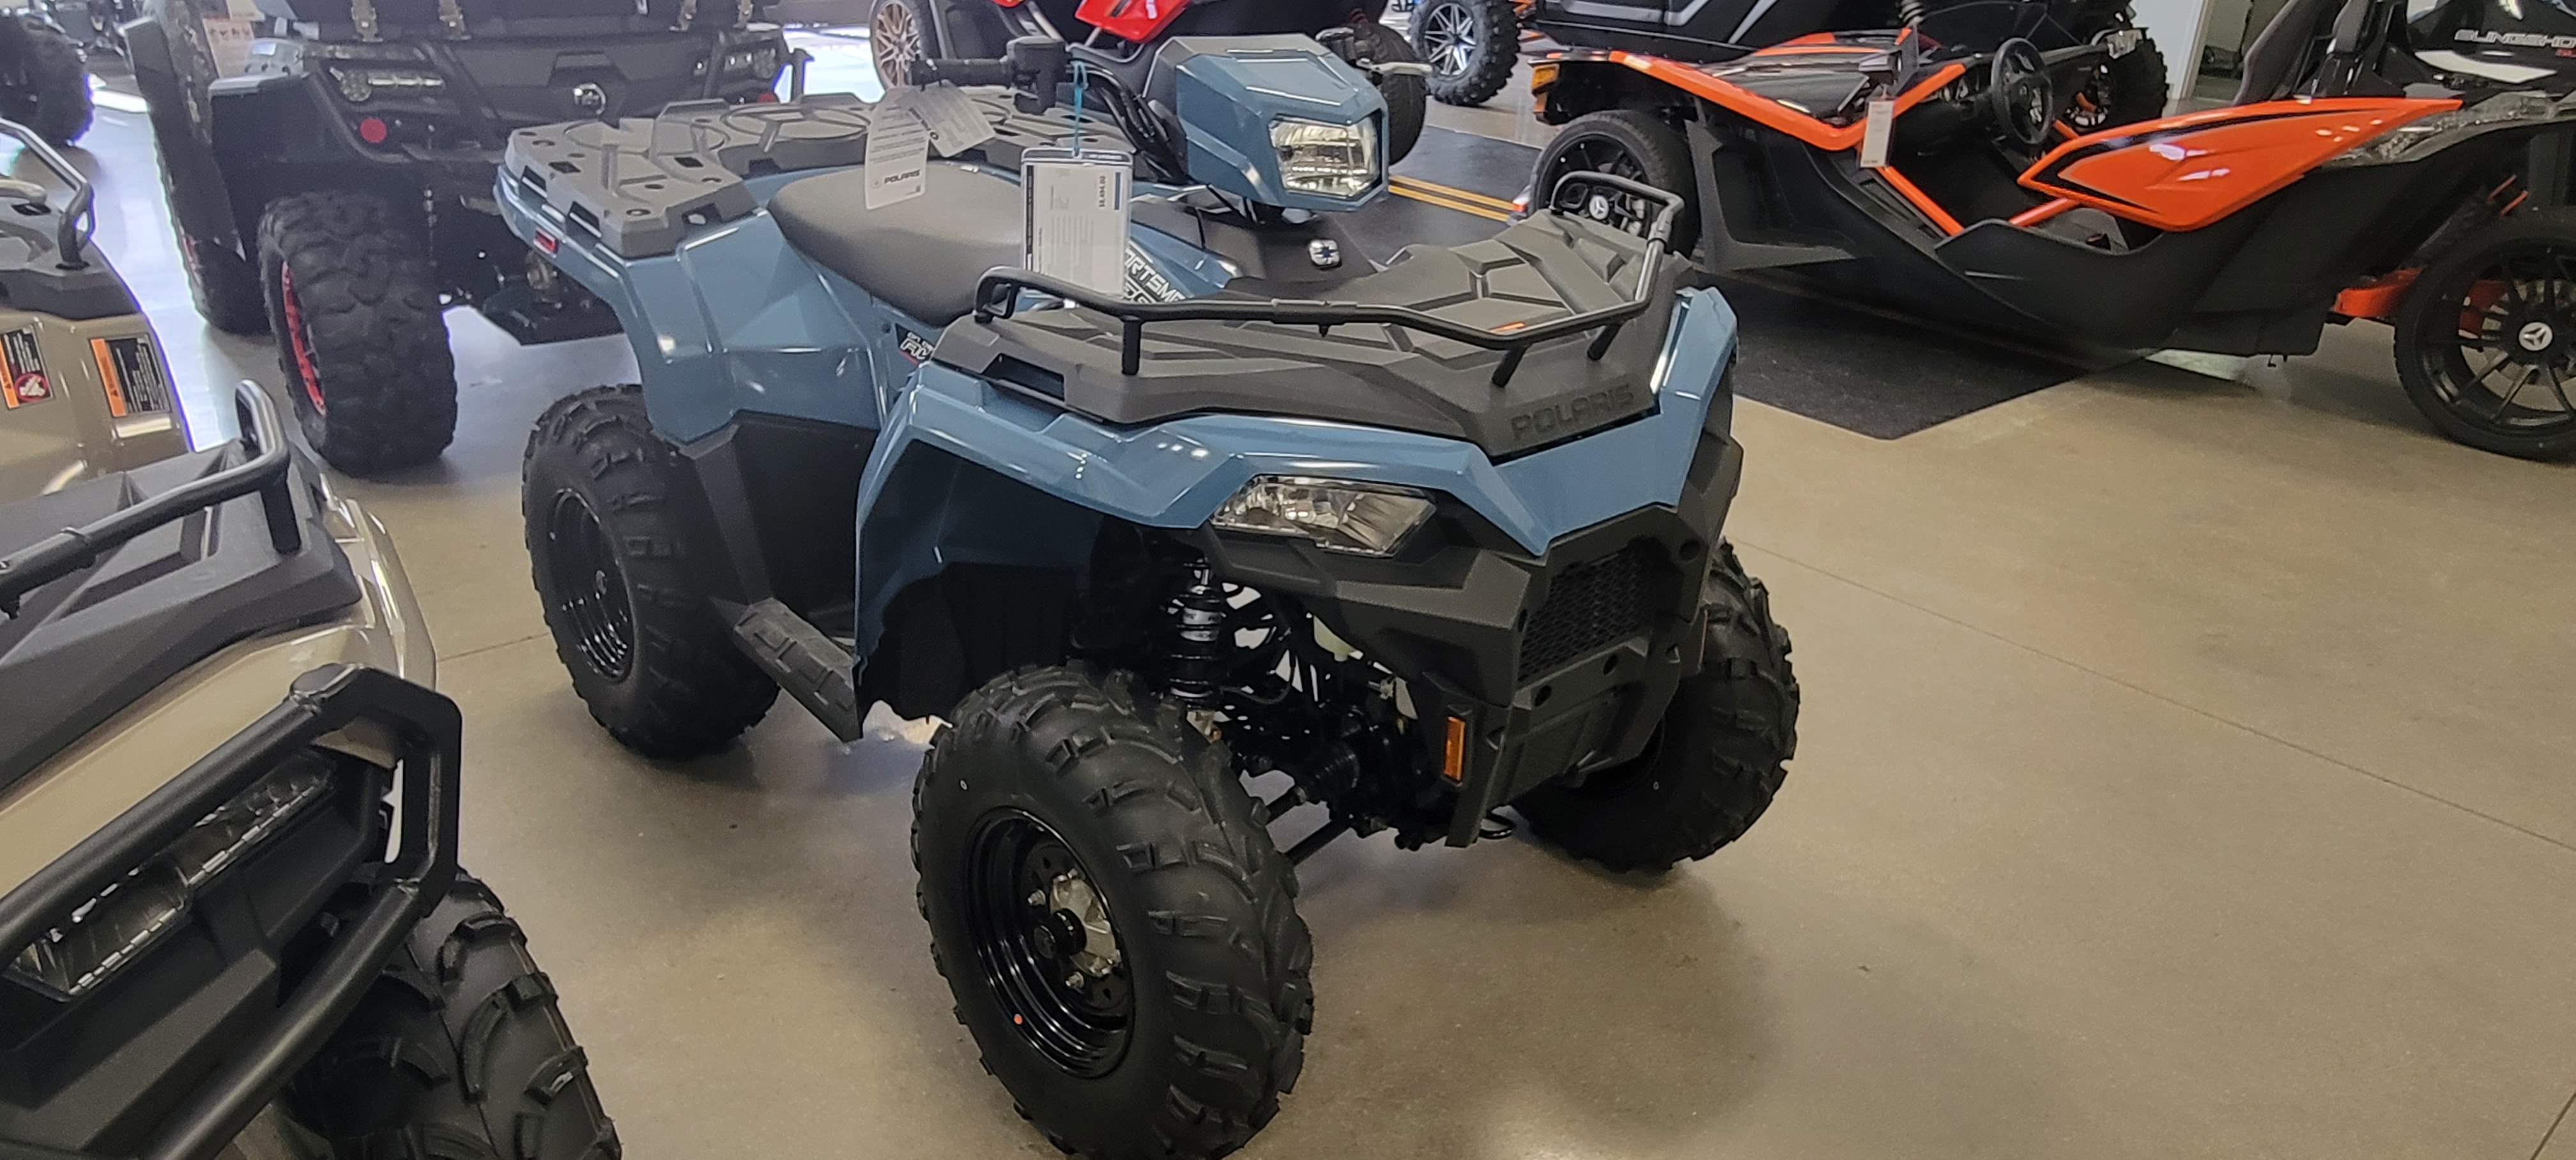 2022 Polaris Sportsman 450 H.O. Base at Brenny's Motorcycle Clinic, Bettendorf, IA 52722